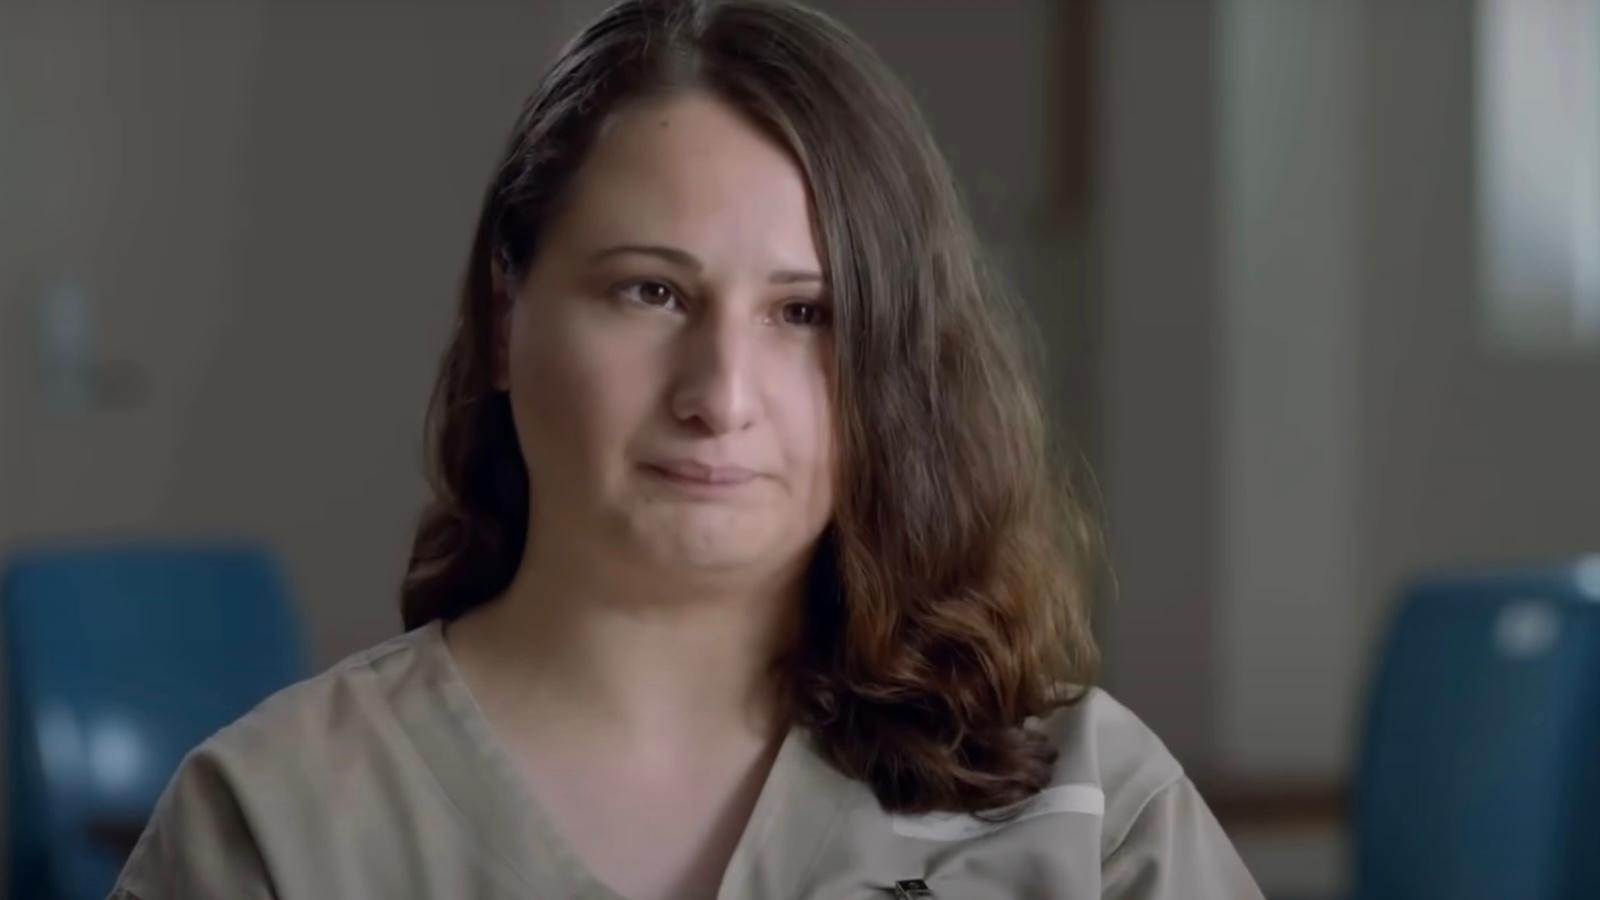 Every Gypsy Rose Blanchard Movie and TV Show You Need To Watch